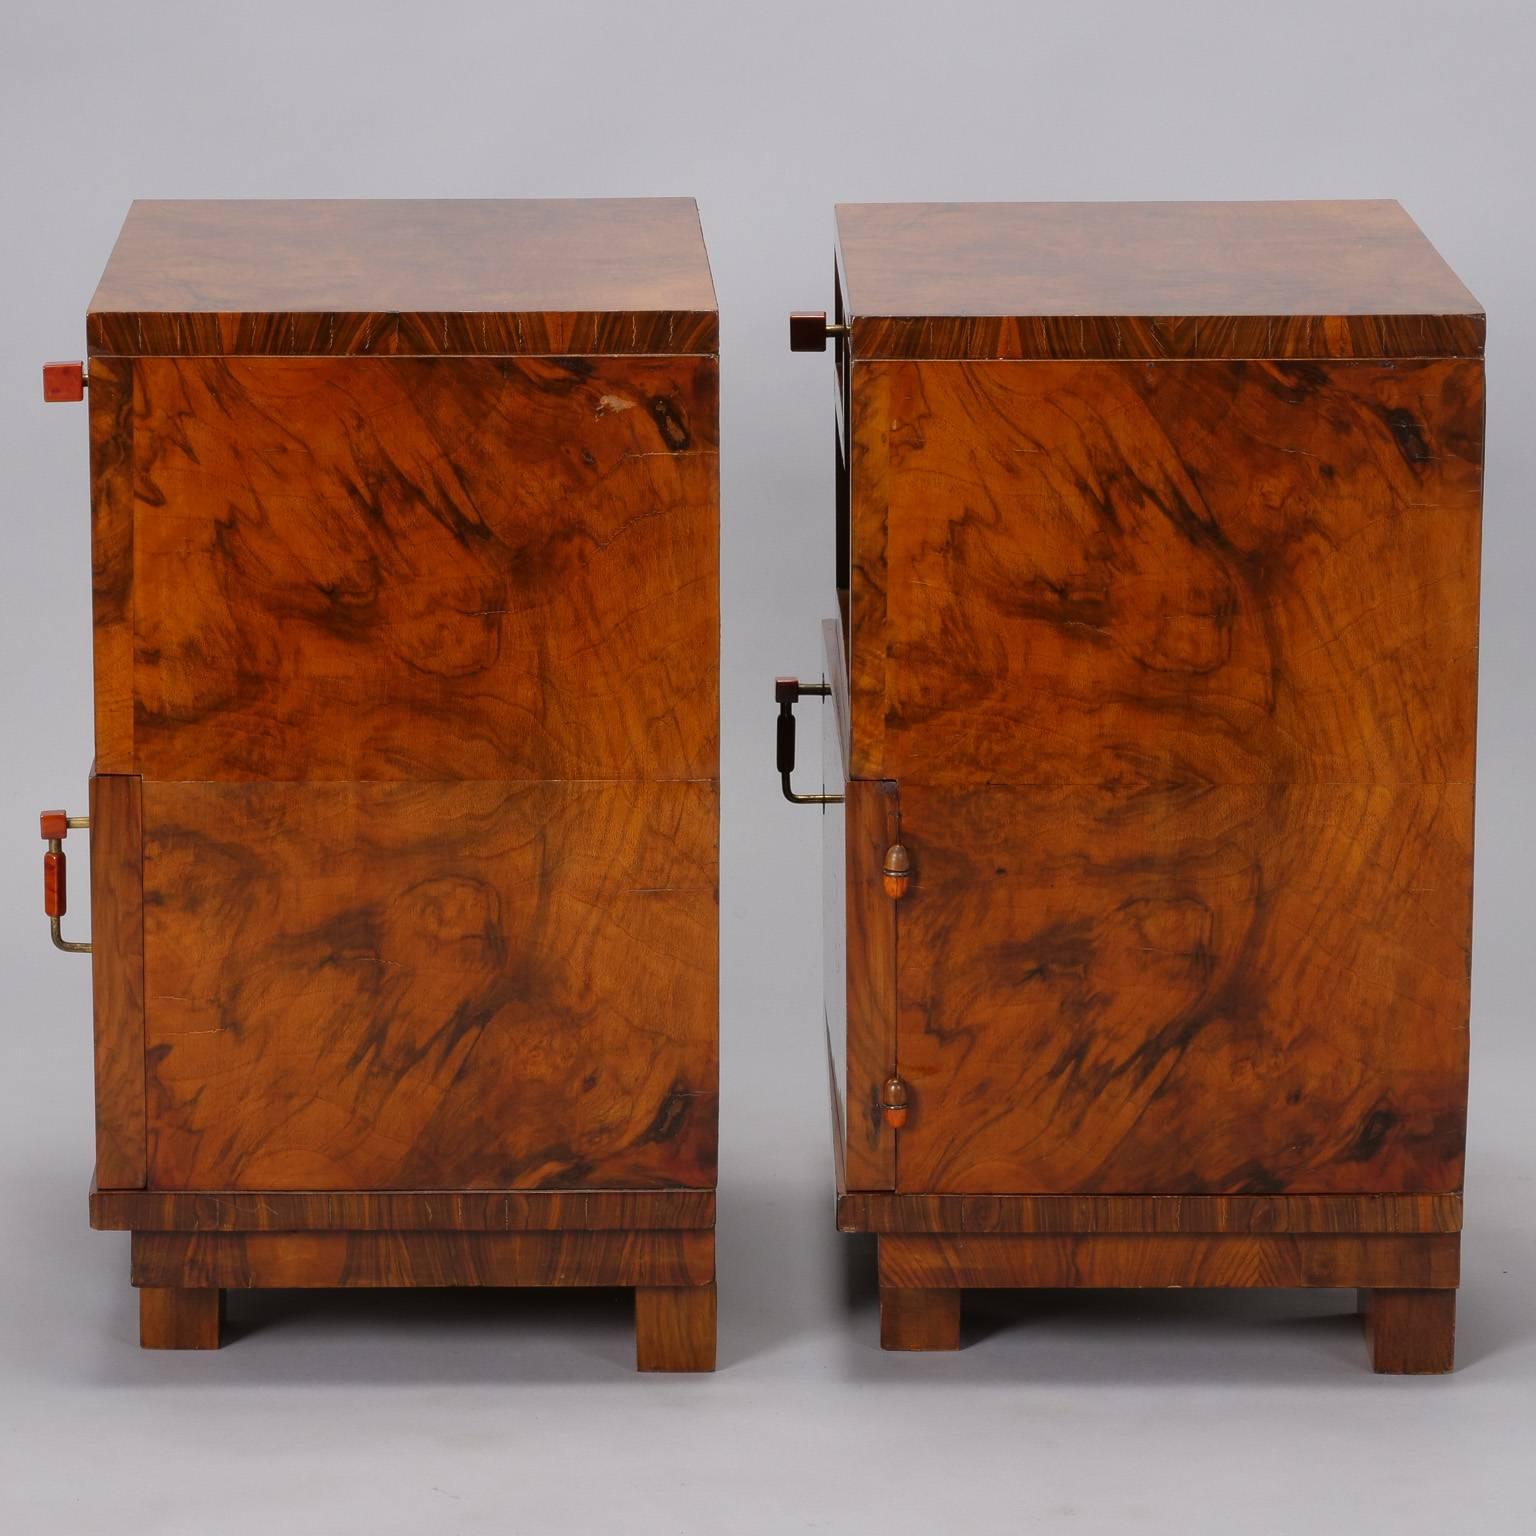 20th Century Pair of Deco Burl Wood Bedside Cabinets with Bakelite Handles